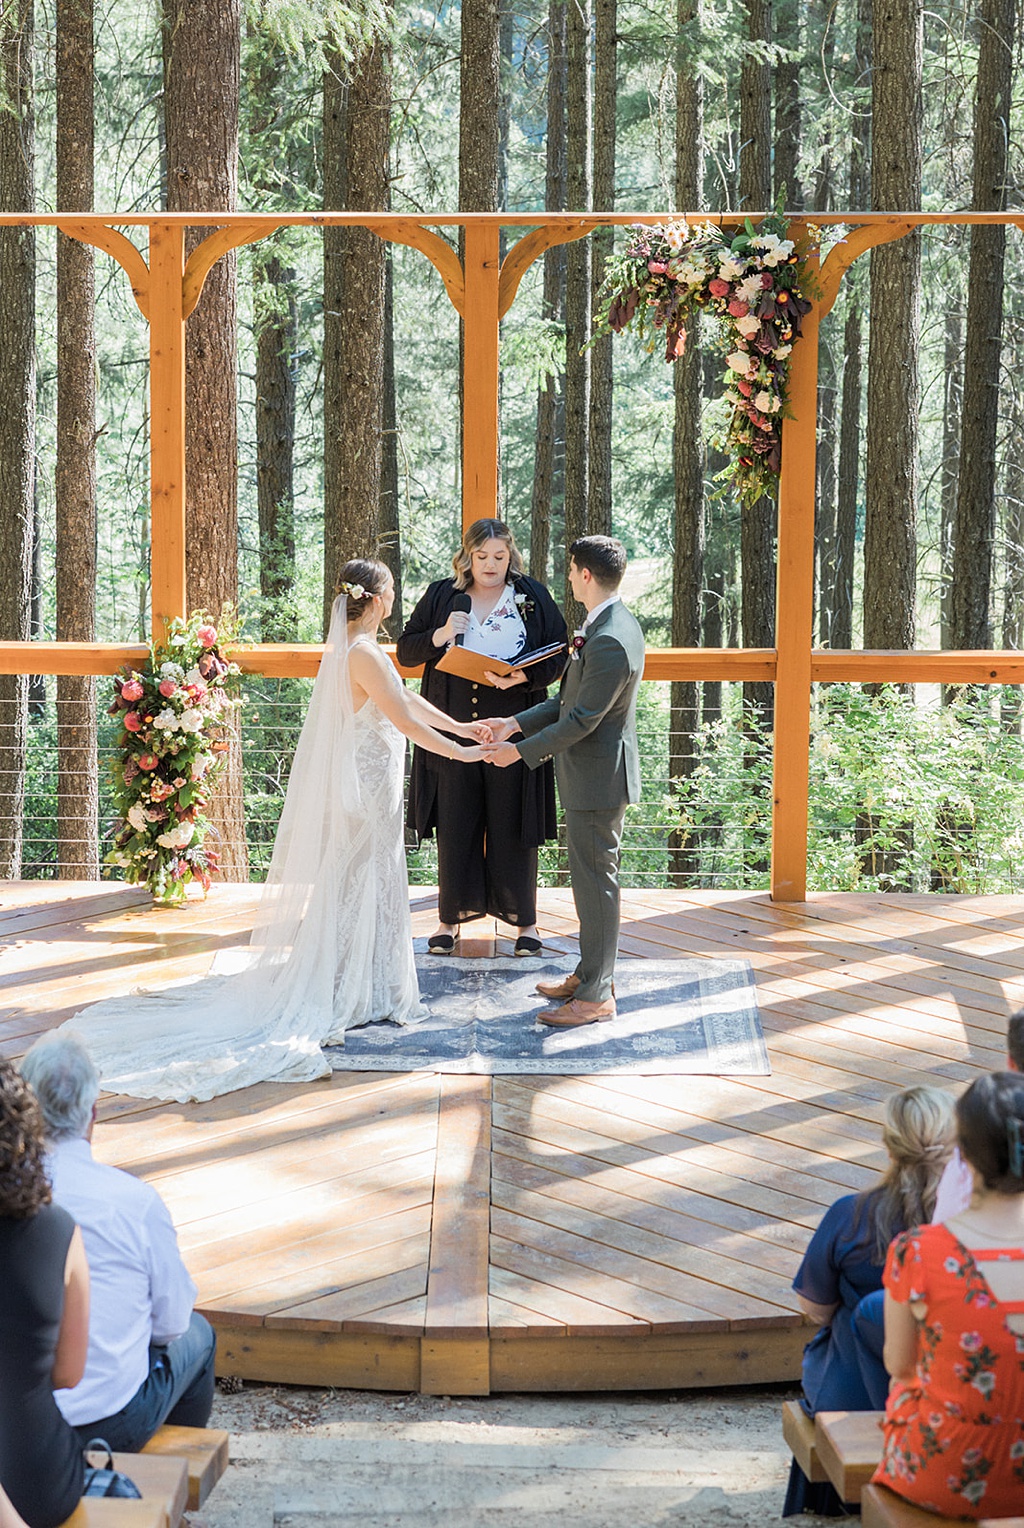 Wedding florals and wooden platform for the wedding ceremony at Tierra Retreat Center